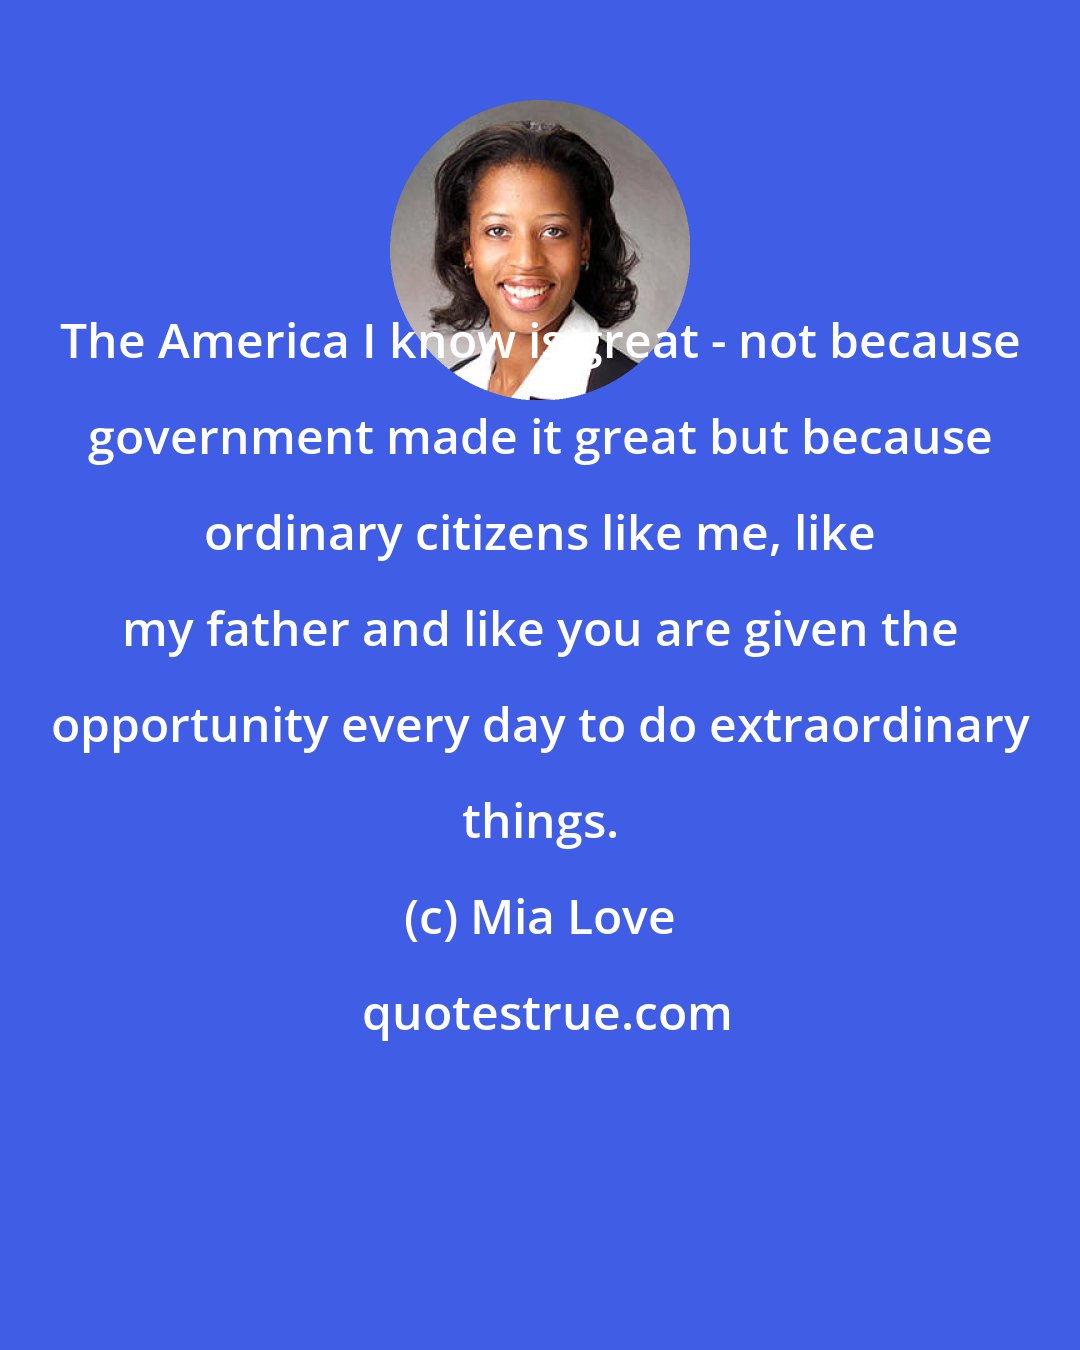 Mia Love: The America I know is great - not because government made it great but because ordinary citizens like me, like my father and like you are given the opportunity every day to do extraordinary things.